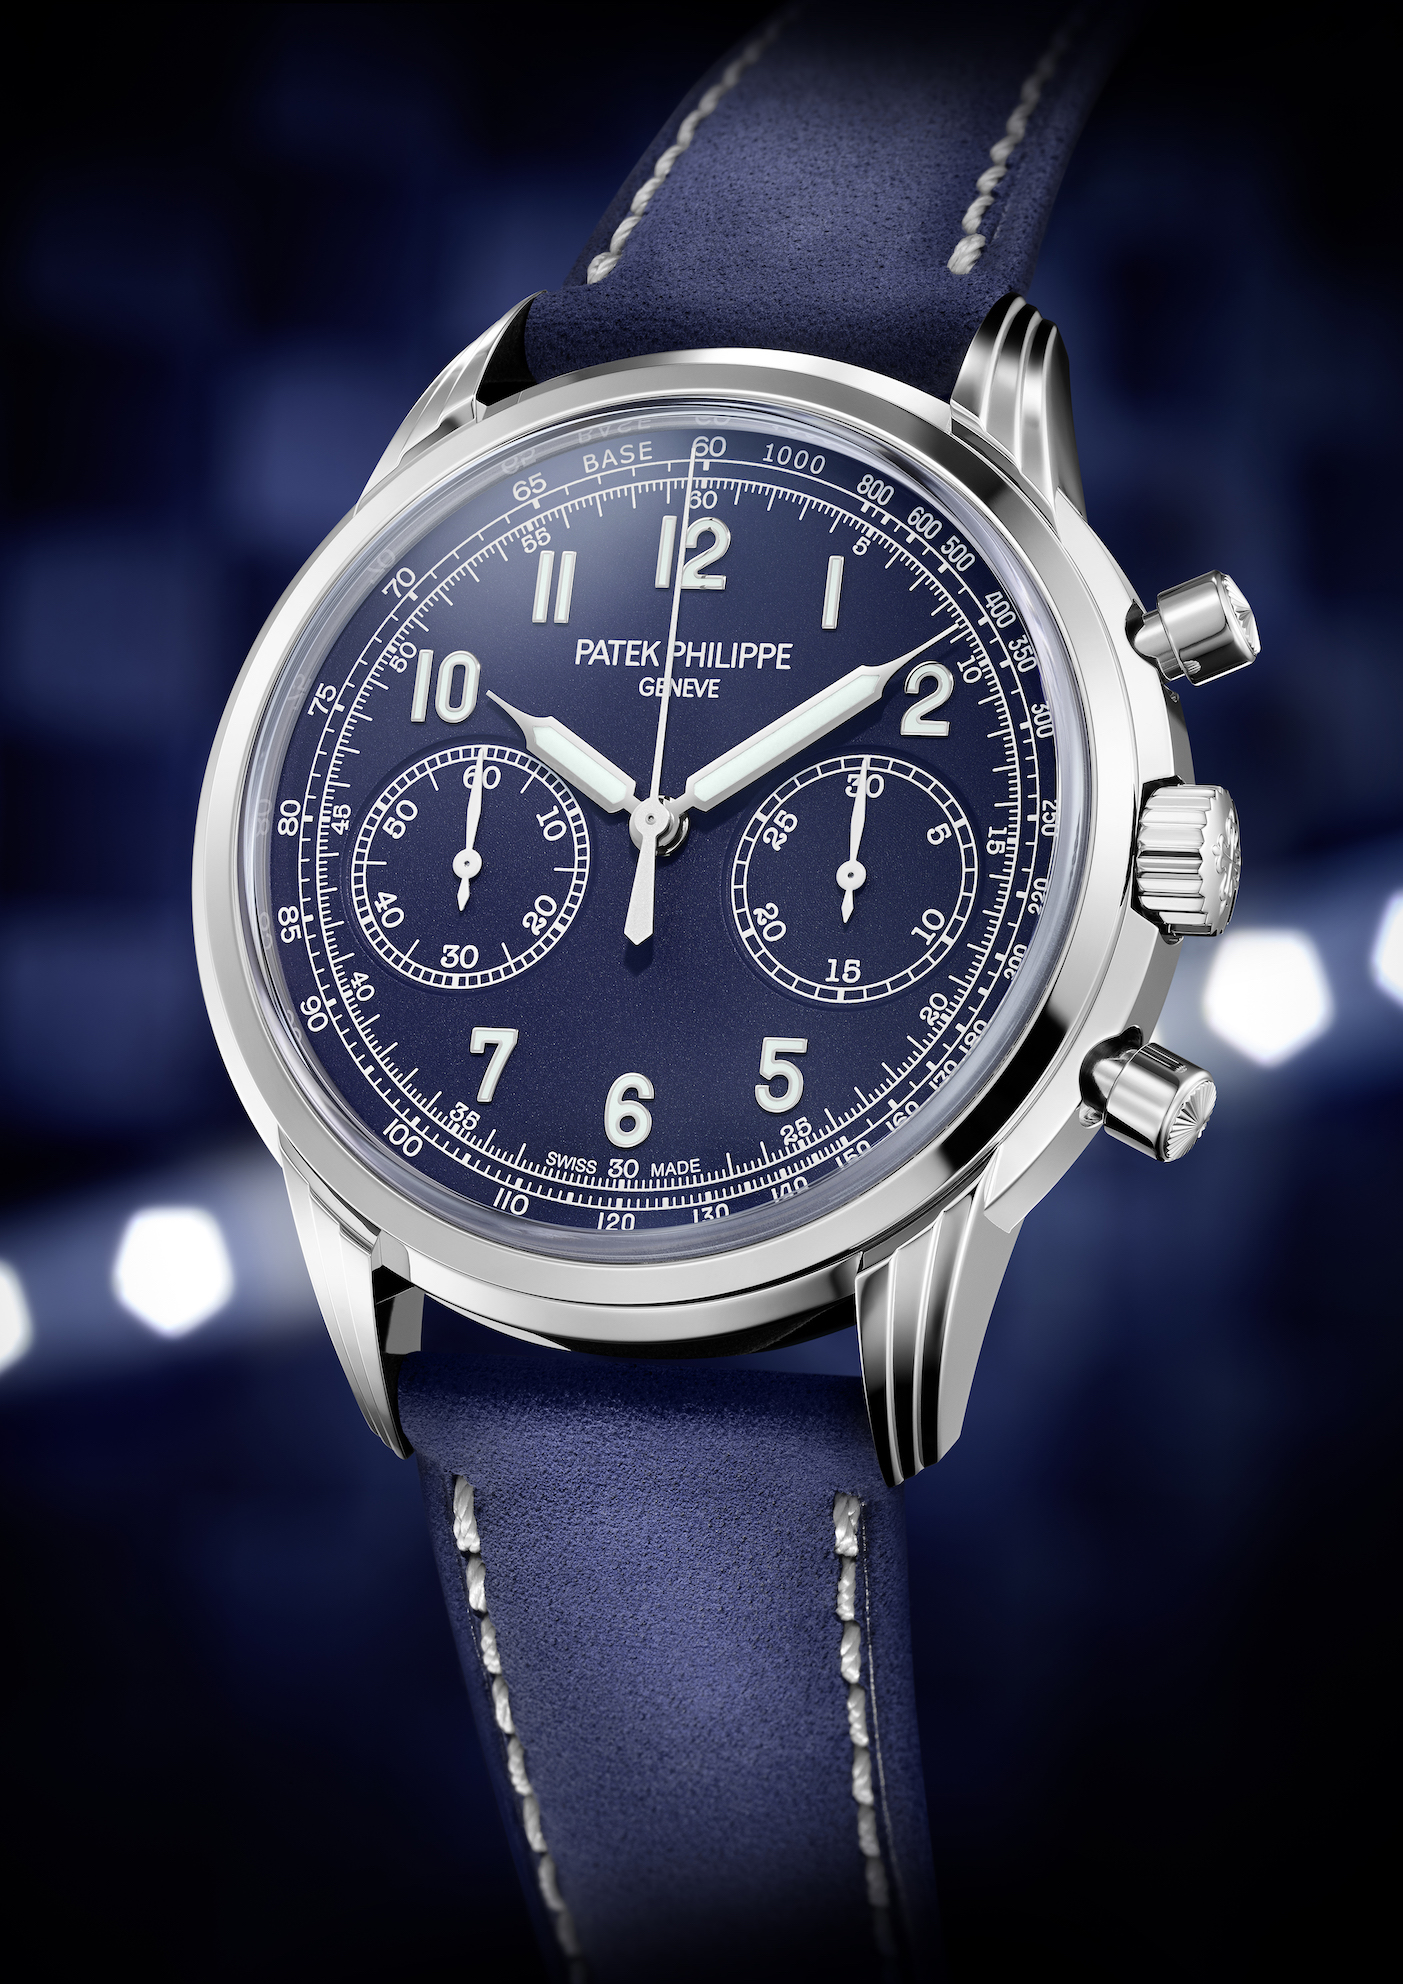 Patek Philippe, Ref. 5172G Chronograph as seen at Baselworld 2019